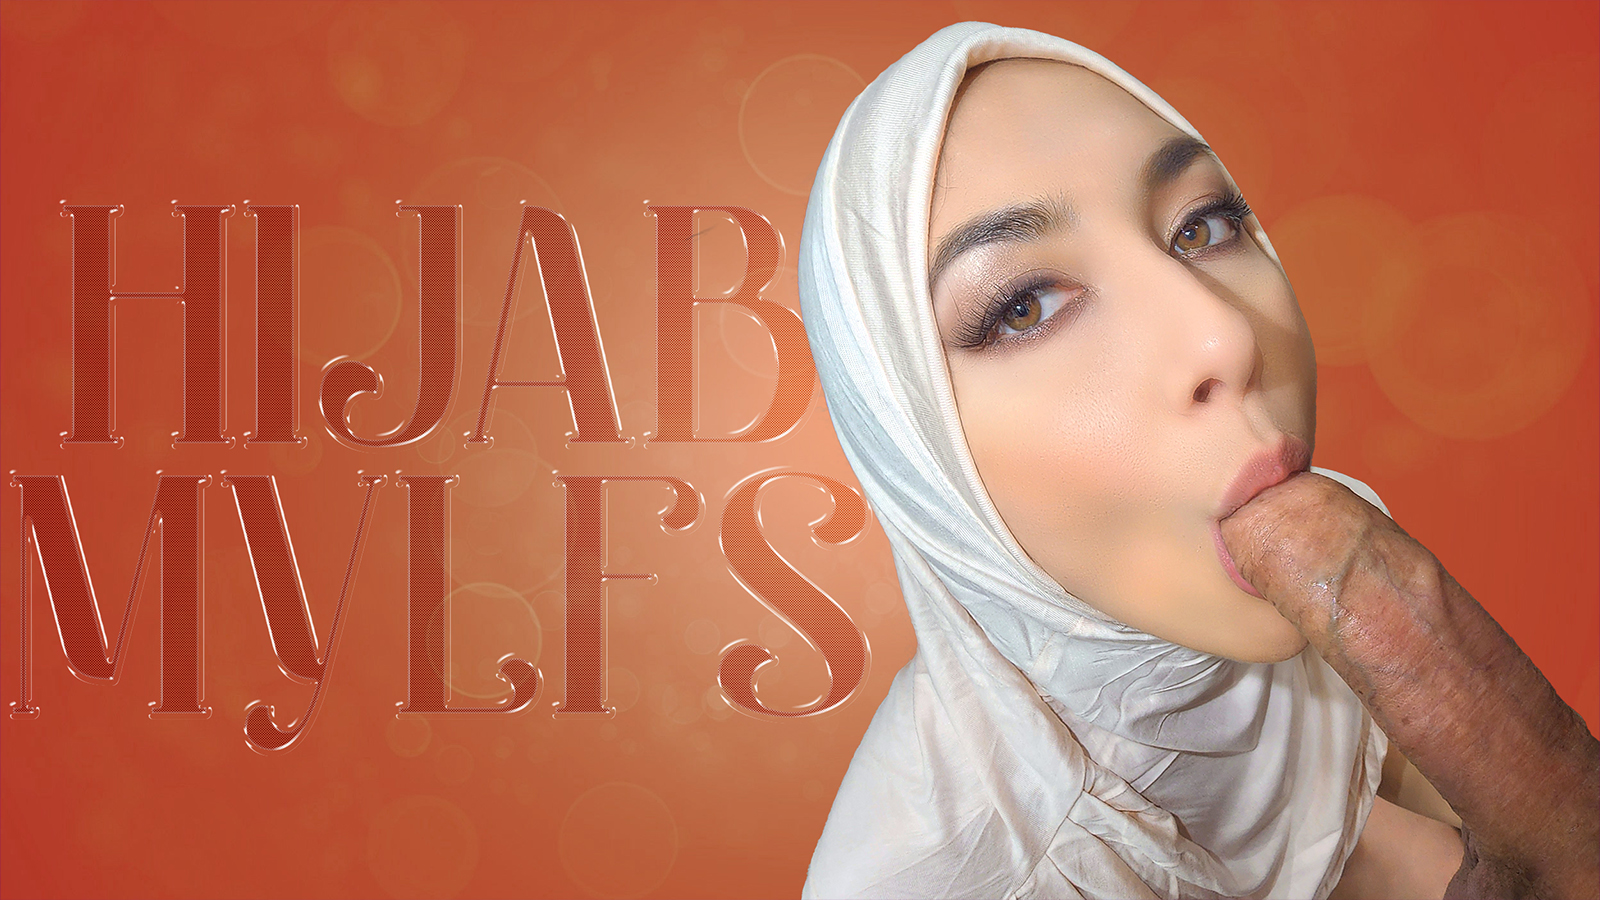 [HijabMylfs] Isabel Love (Ready for Marriage)